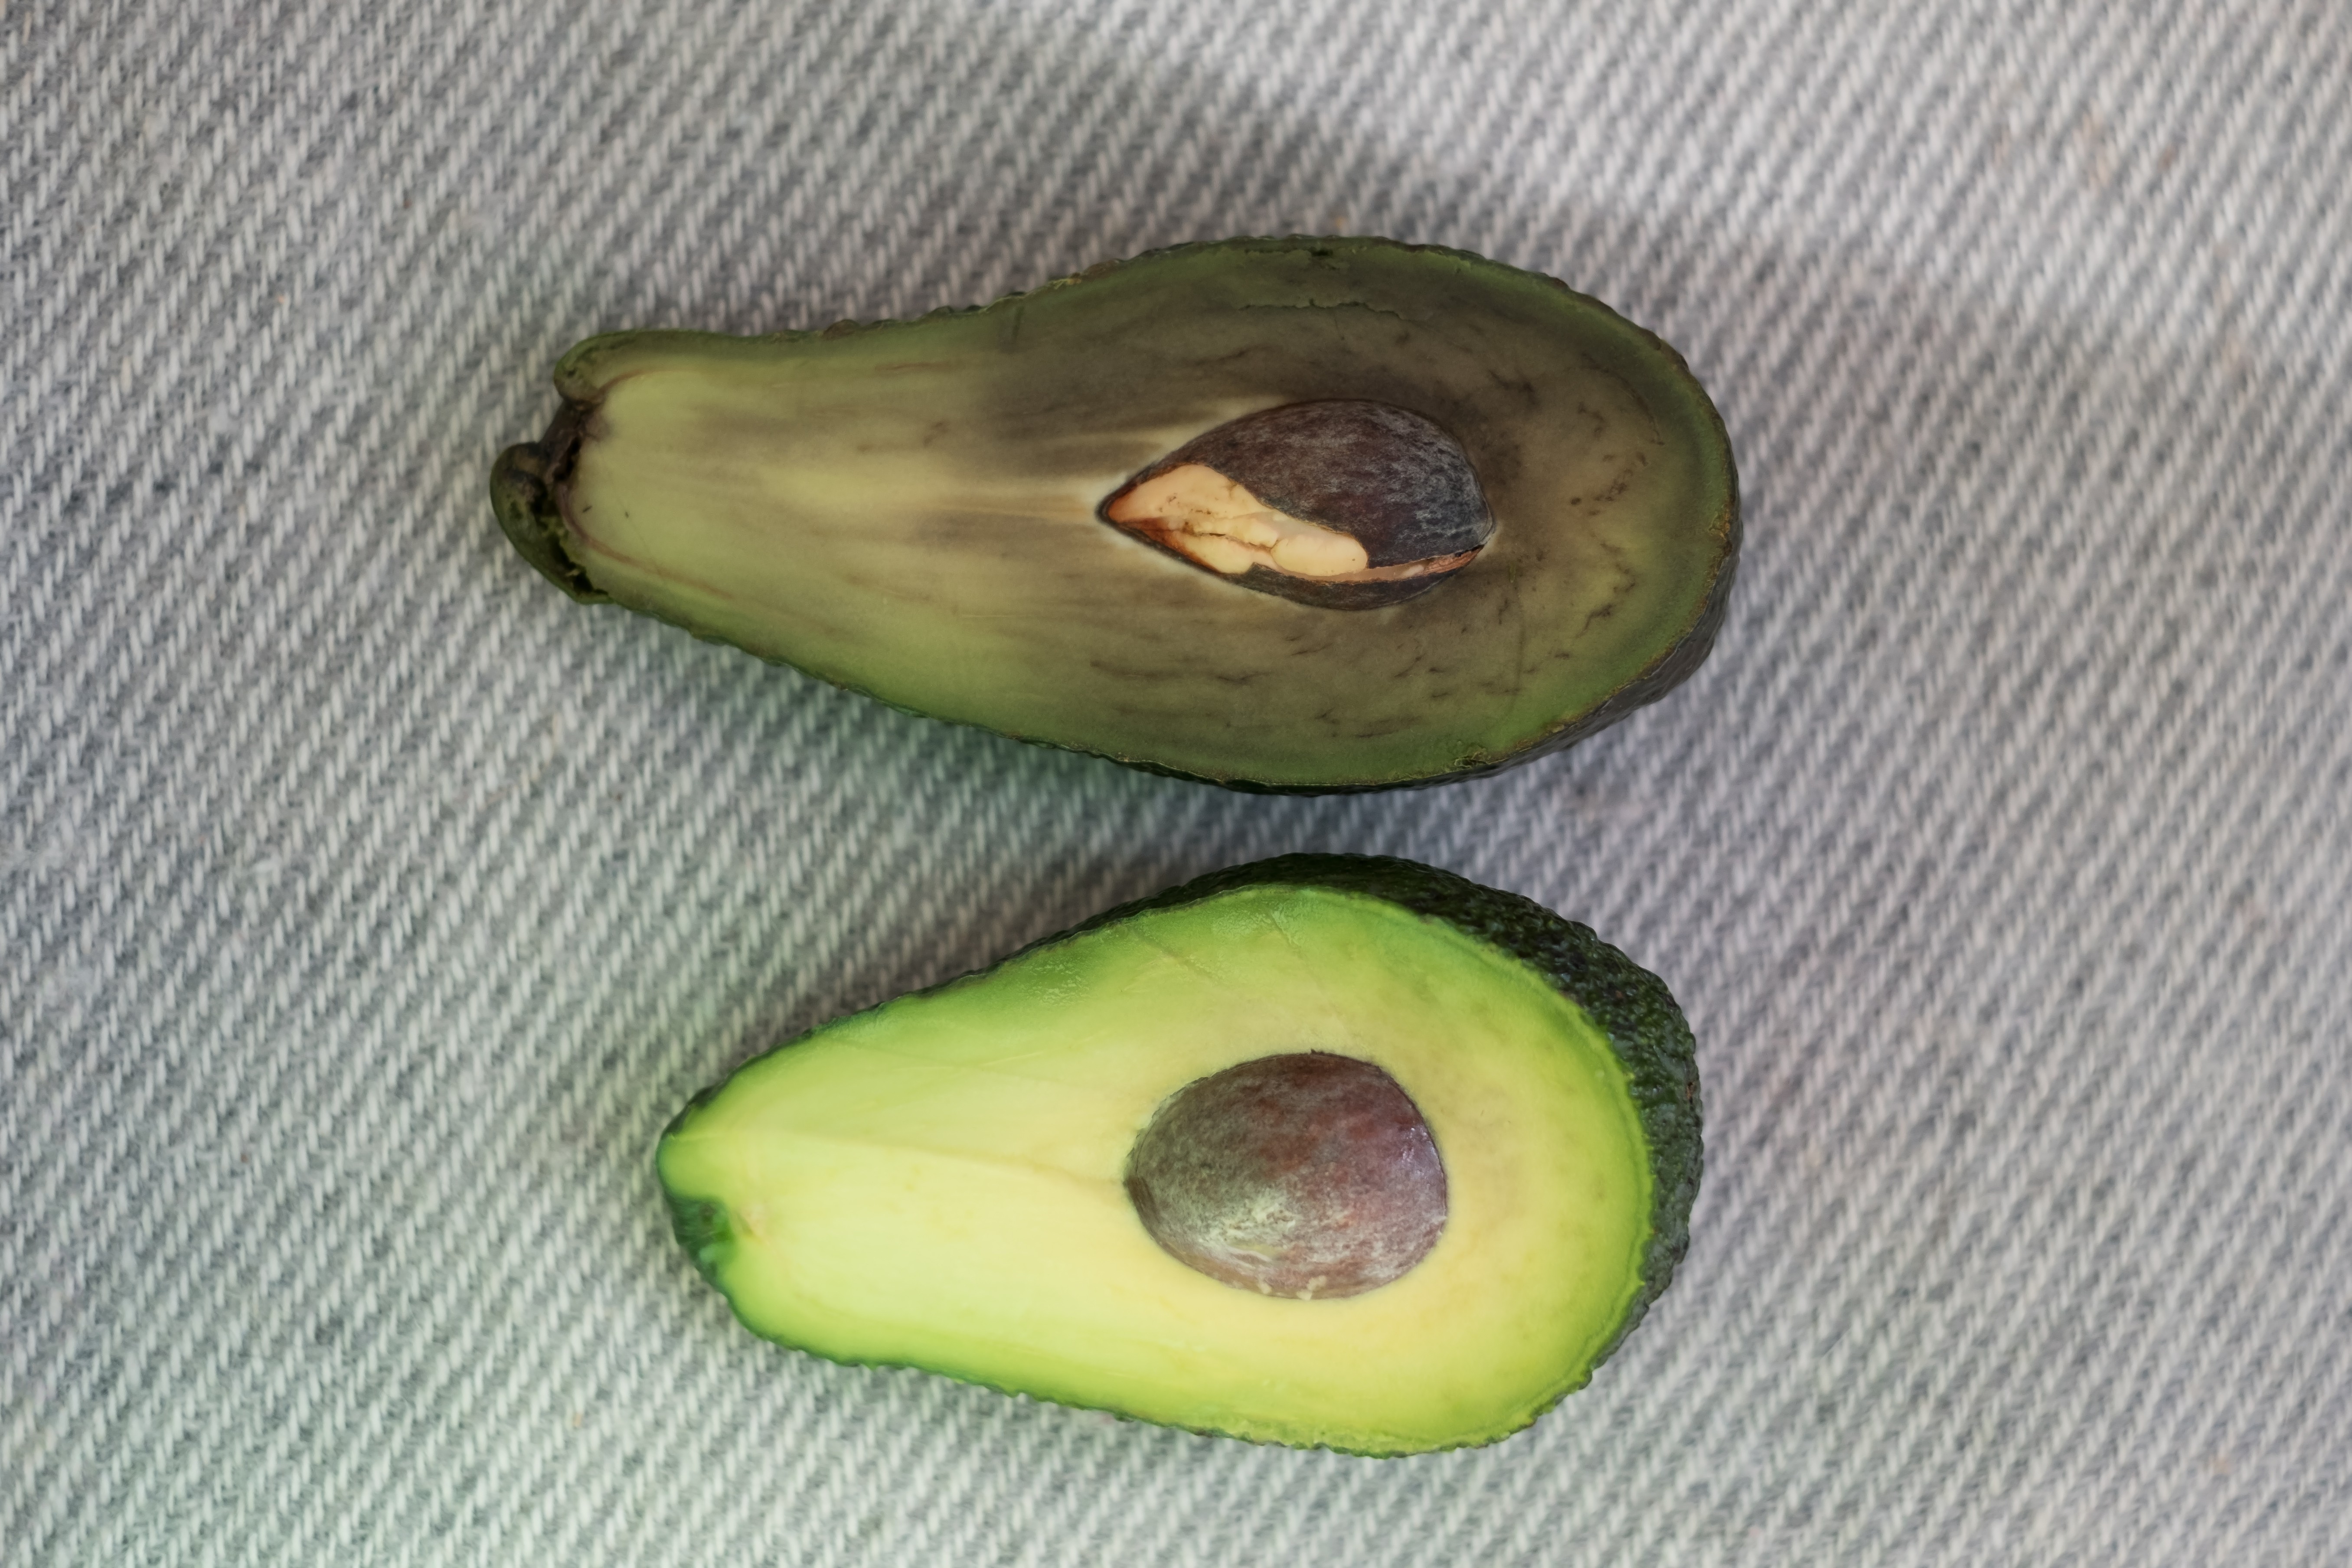 Responding to column about how hard it is to find good avocados in city, you tip some stores and markets, and tell us where to find ‘fantastic’ ones for less than HK$10 and  ‘huge, ripe and buttery’ ones for HK$50